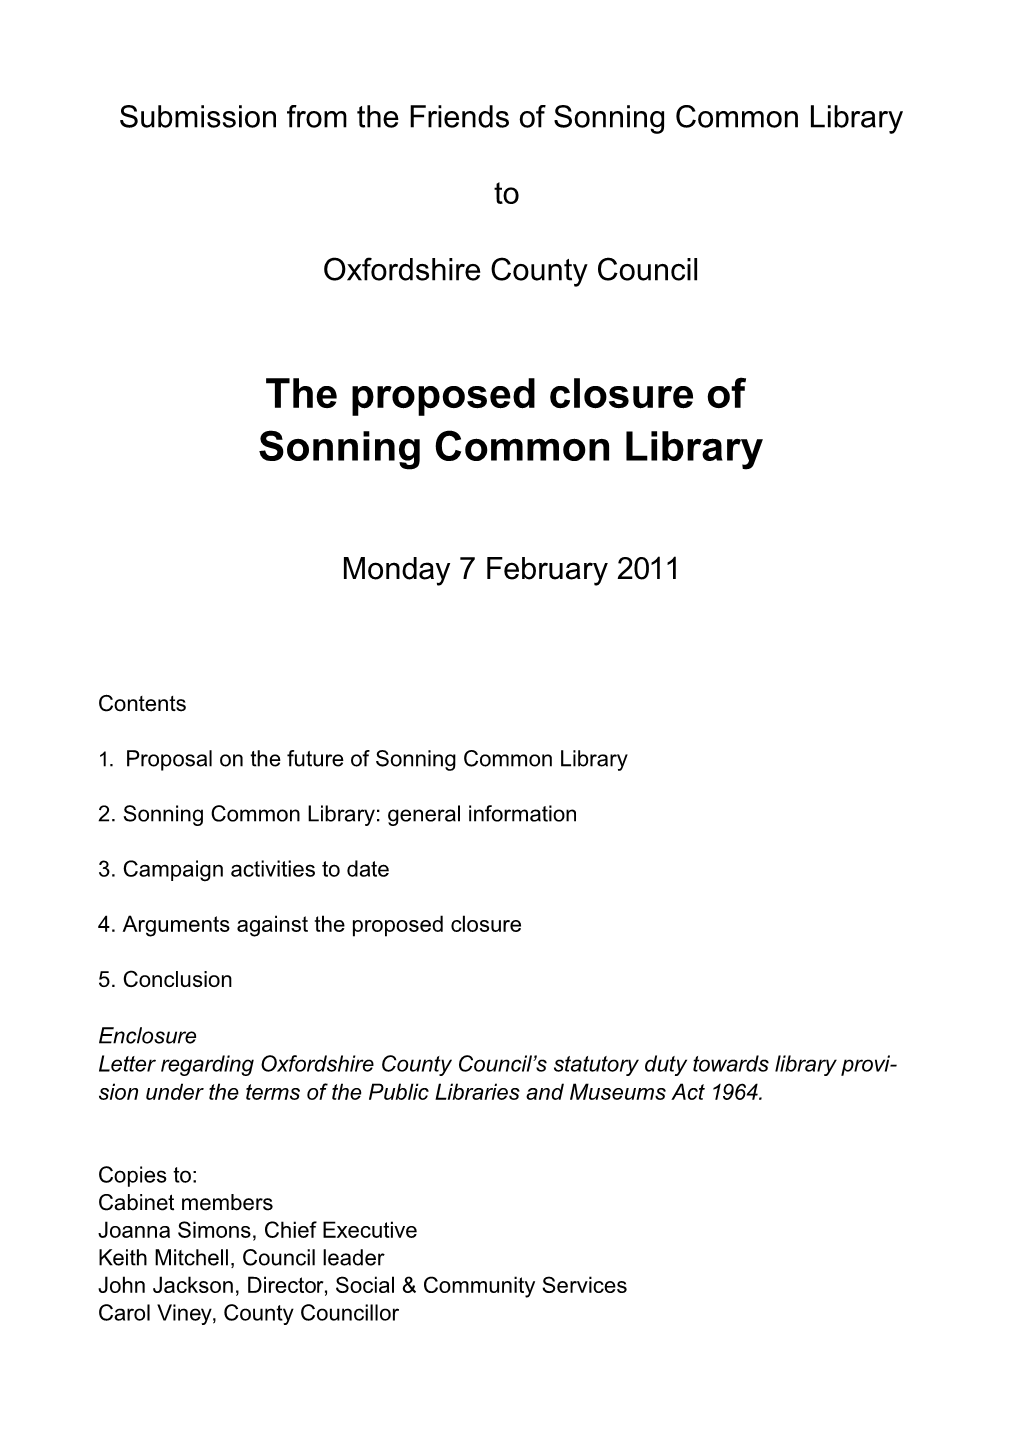 The Proposed Closure of Sonning Common Library